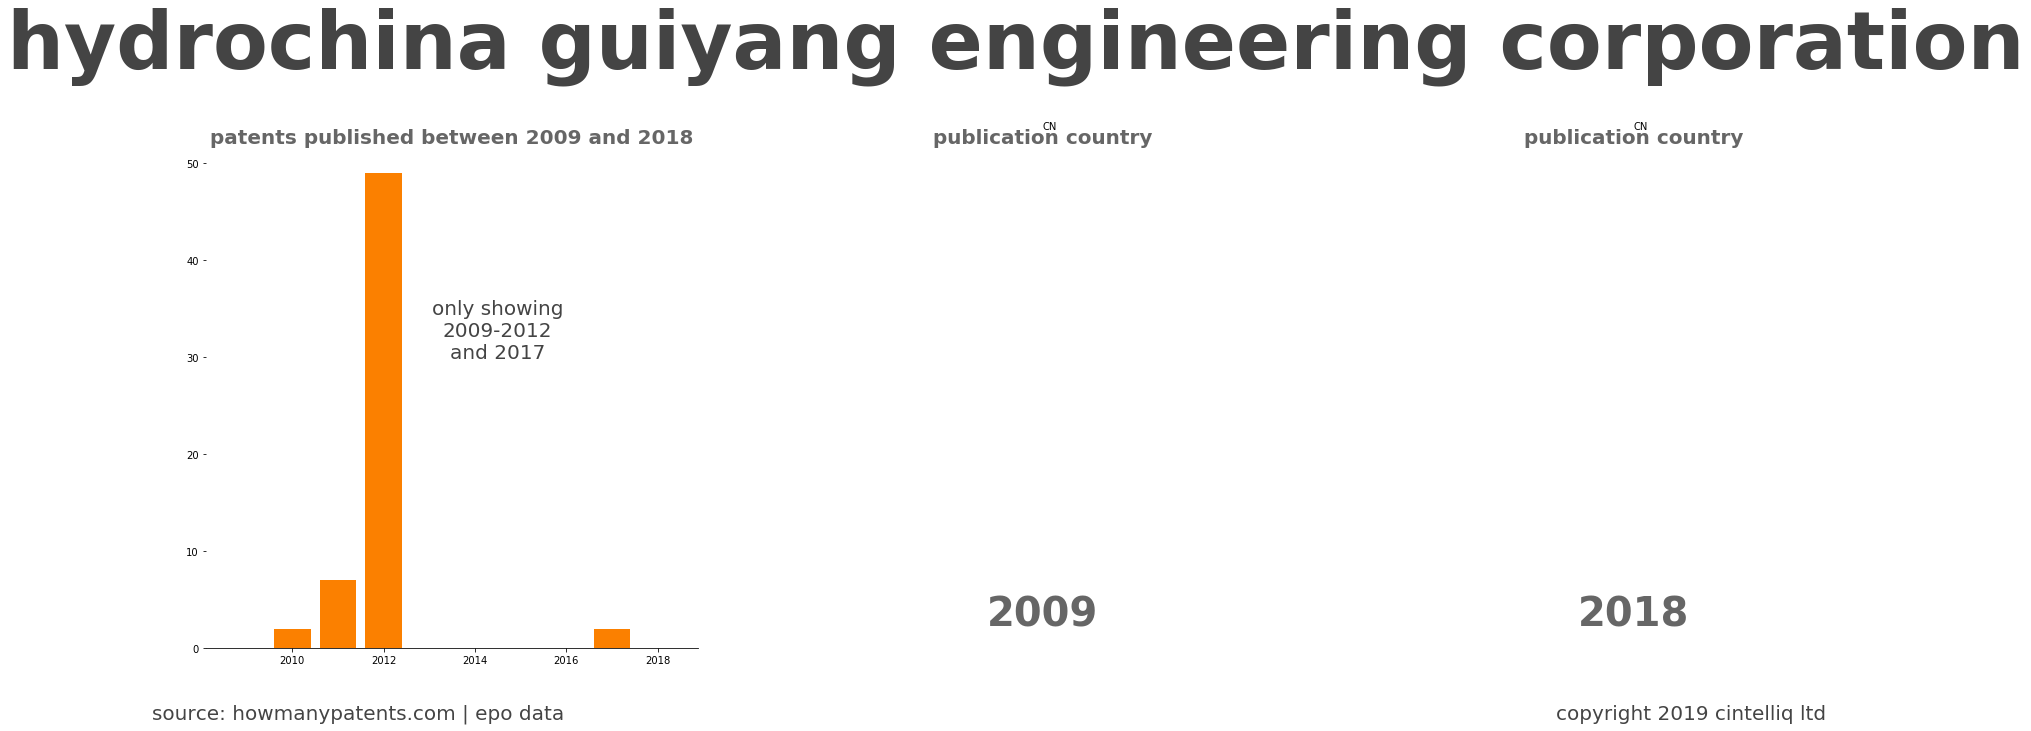 summary of patents for Hydrochina Guiyang Engineering Corporation